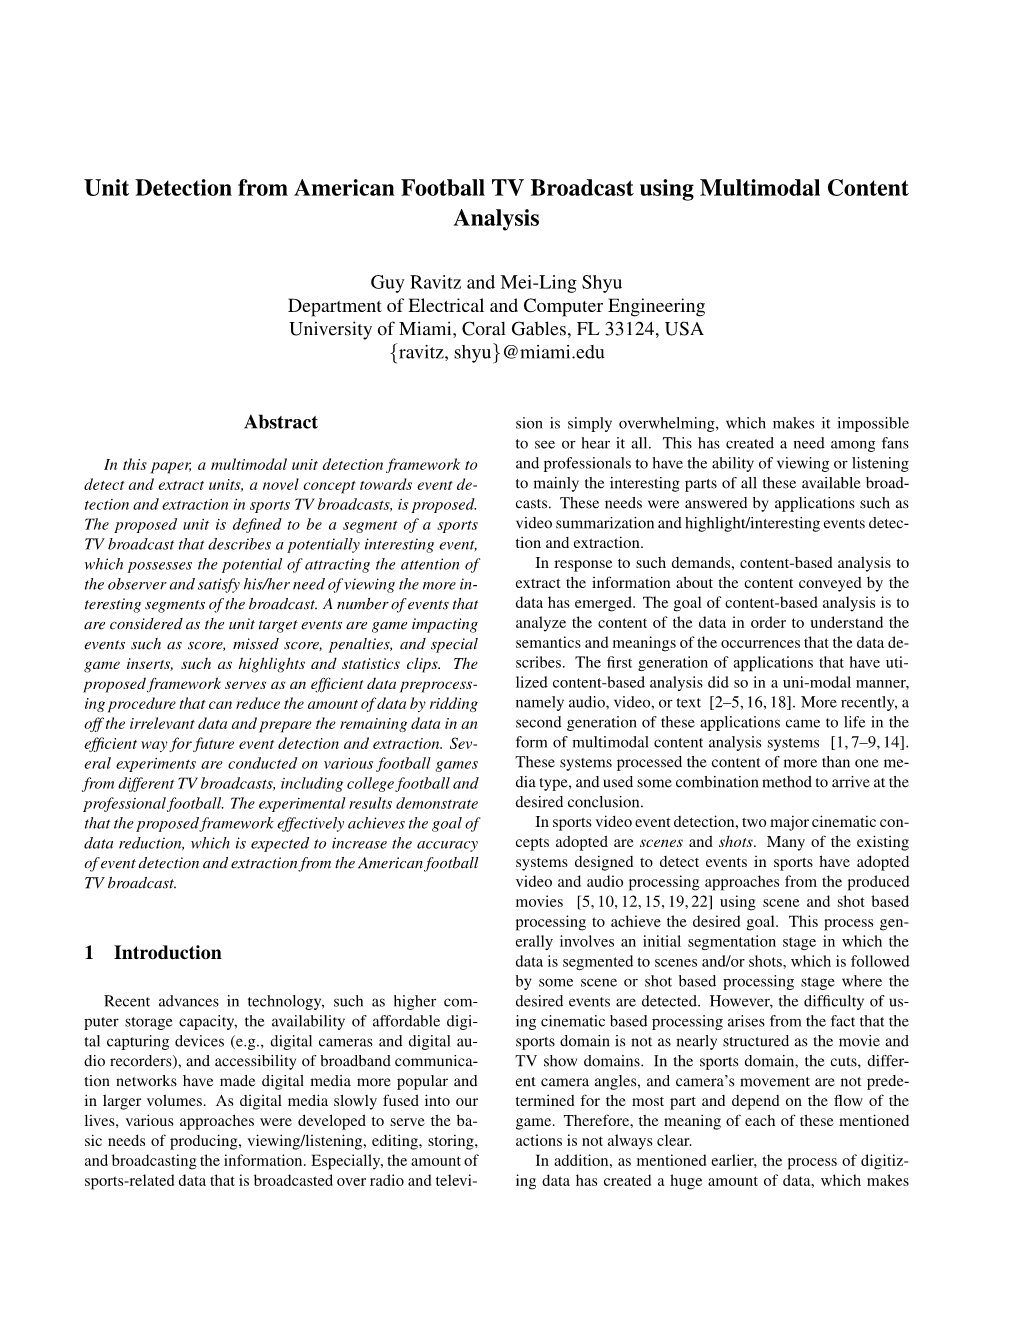 Unit Detection from American Football TV Broadcast Using Multimodal Content Analysis